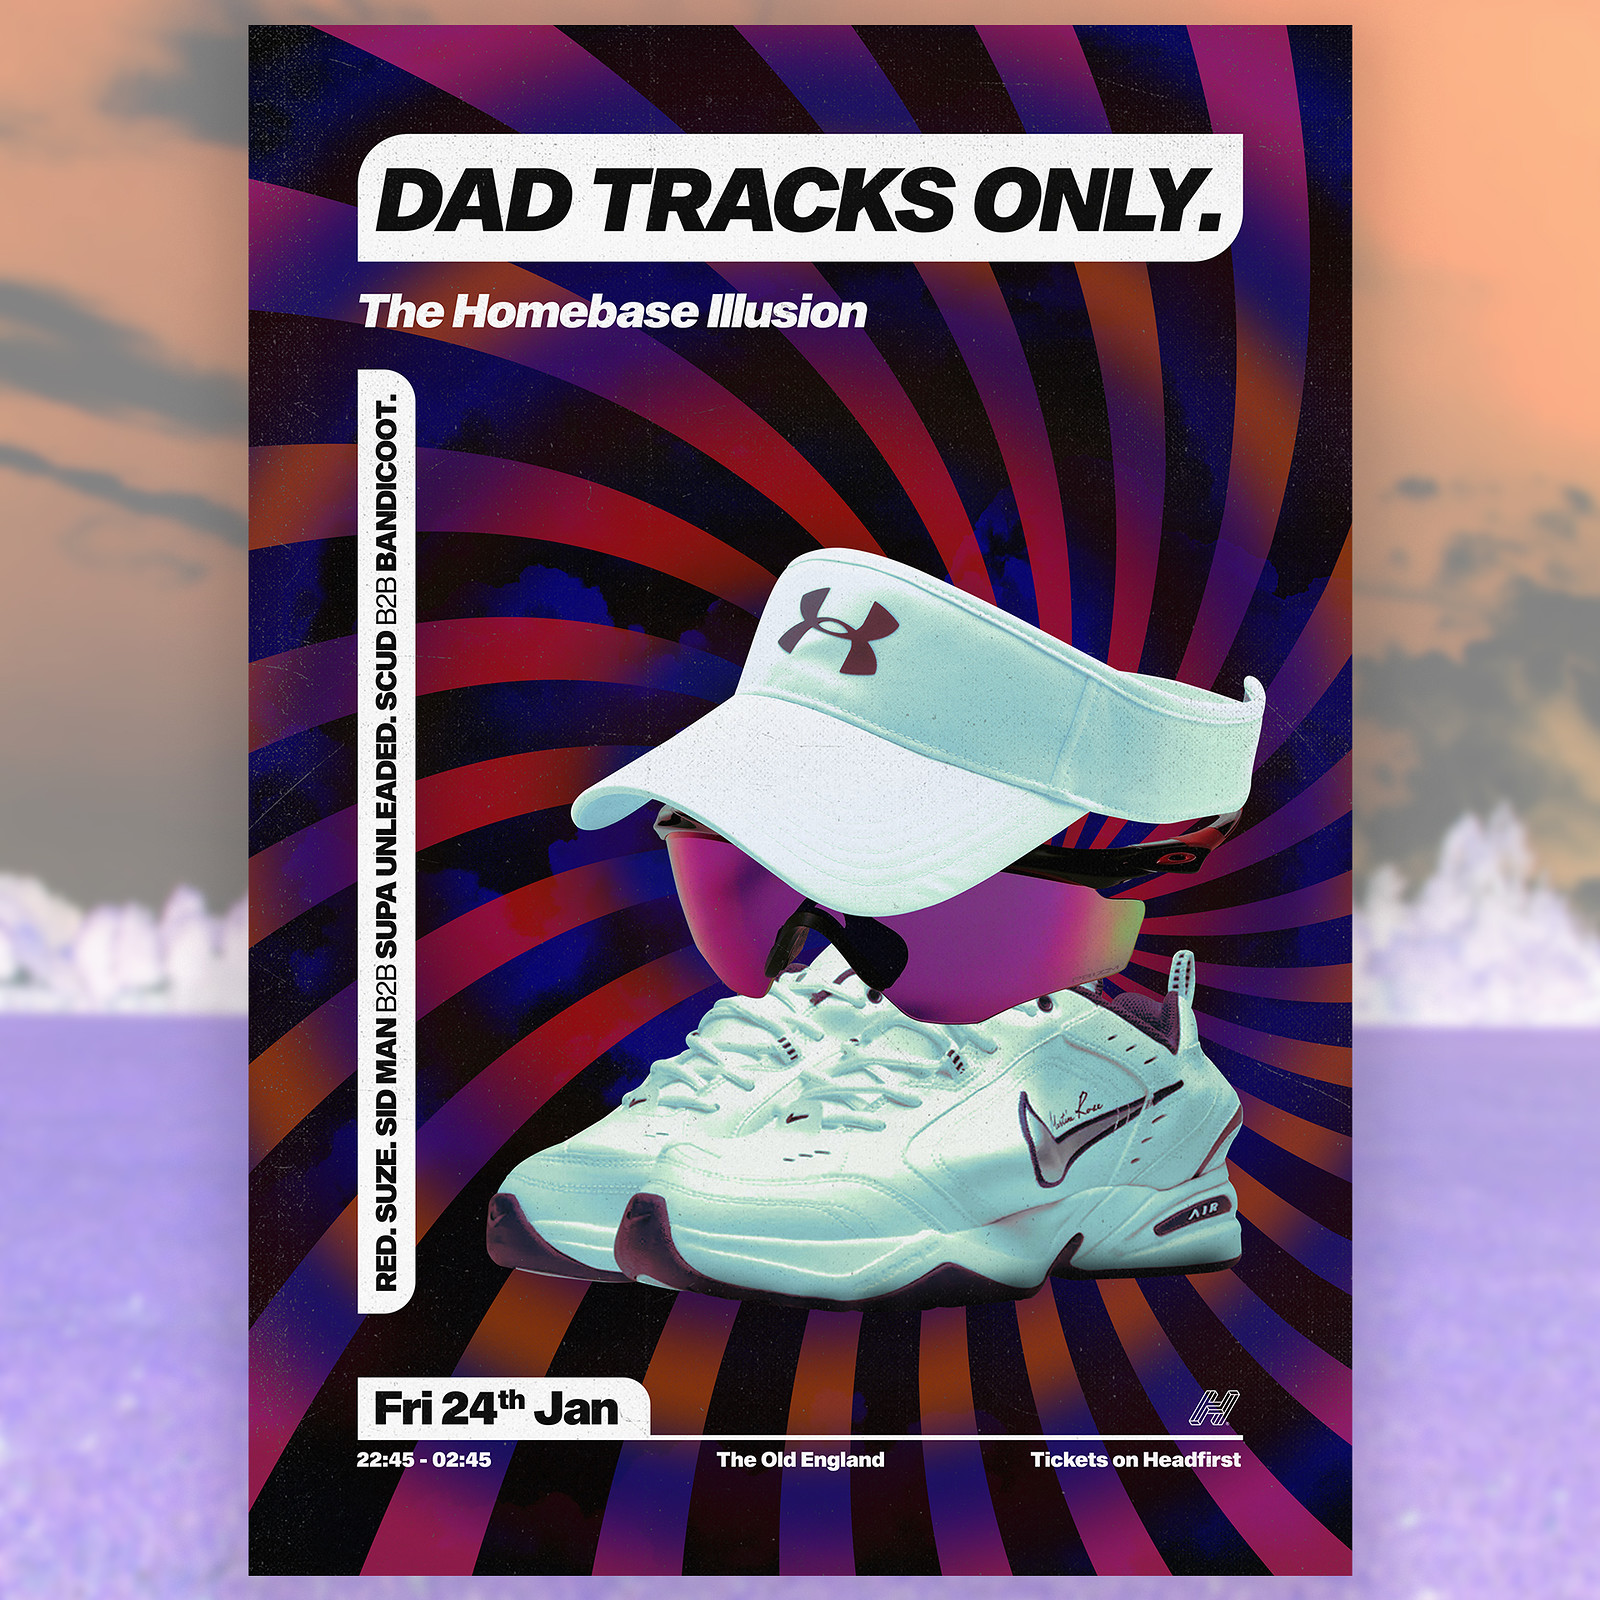 Dad Tracks: The Homebase Illusion at The Old England Pub